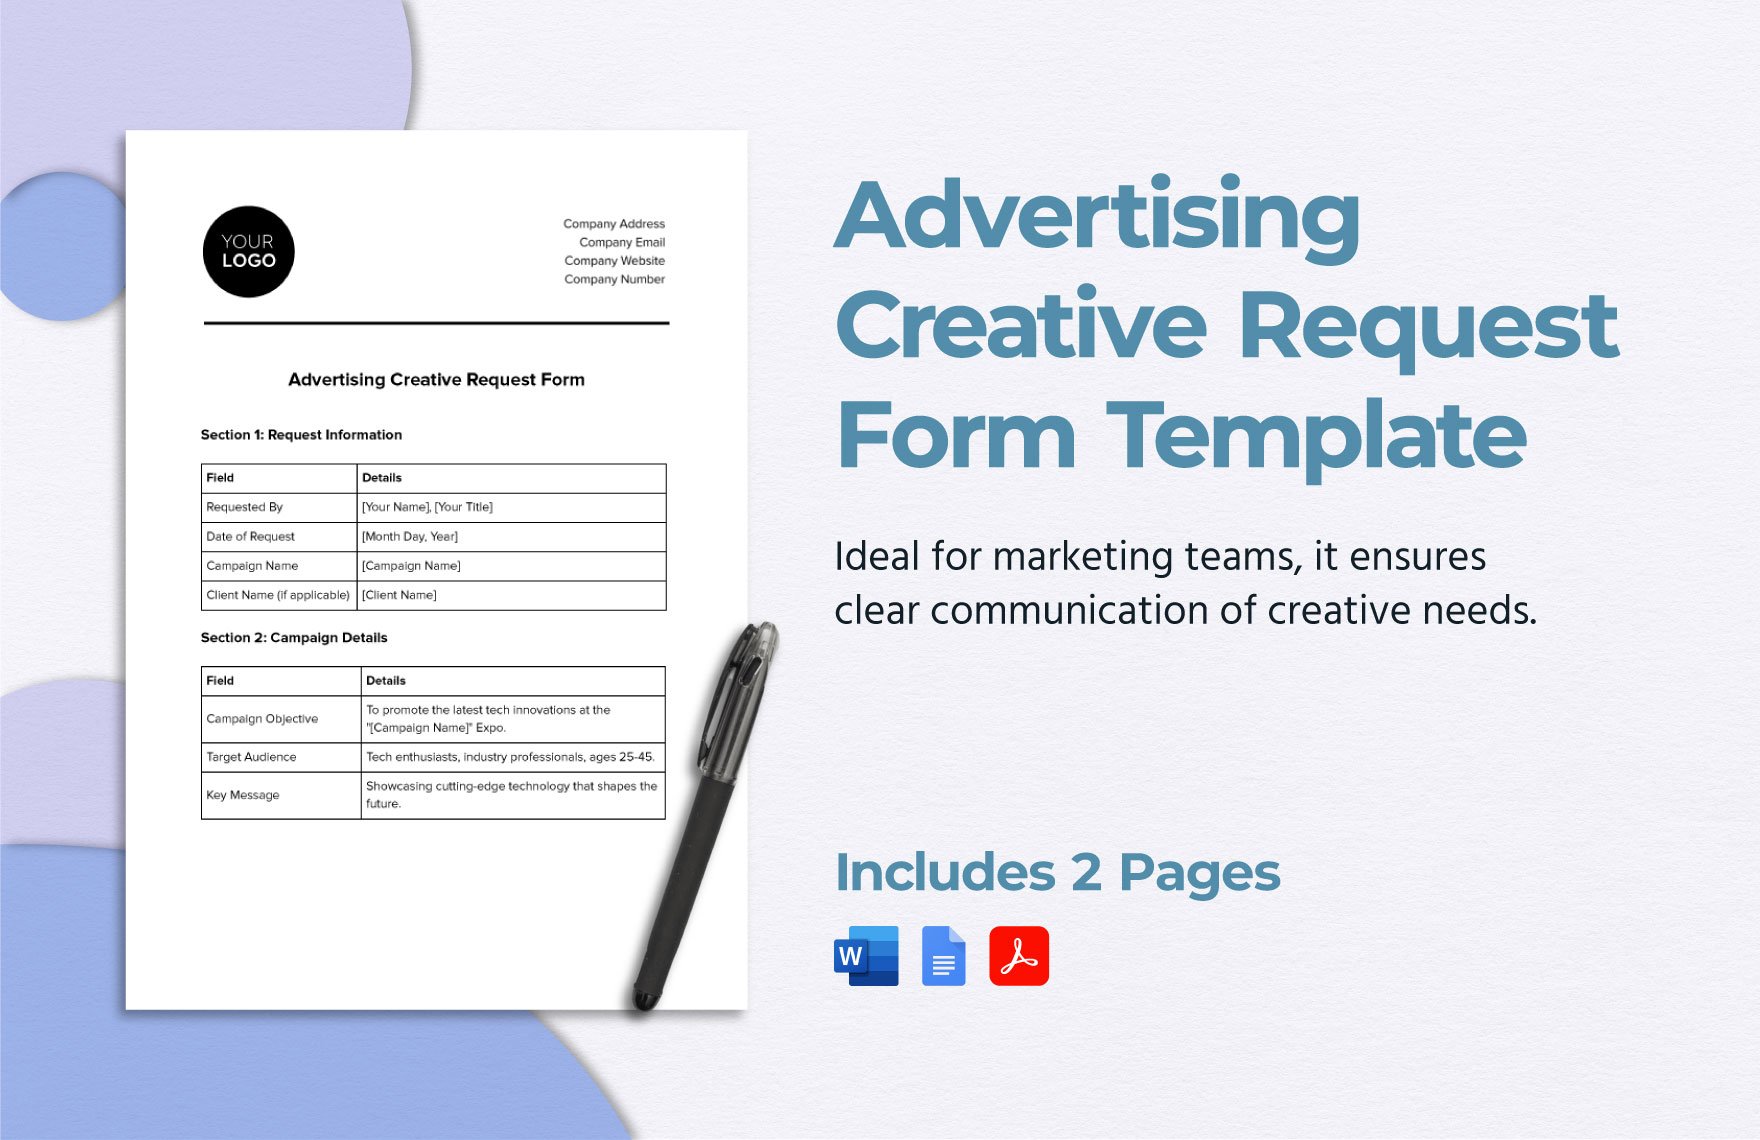 Advertising Creative Request Form Template in Word, Google Docs, PDF